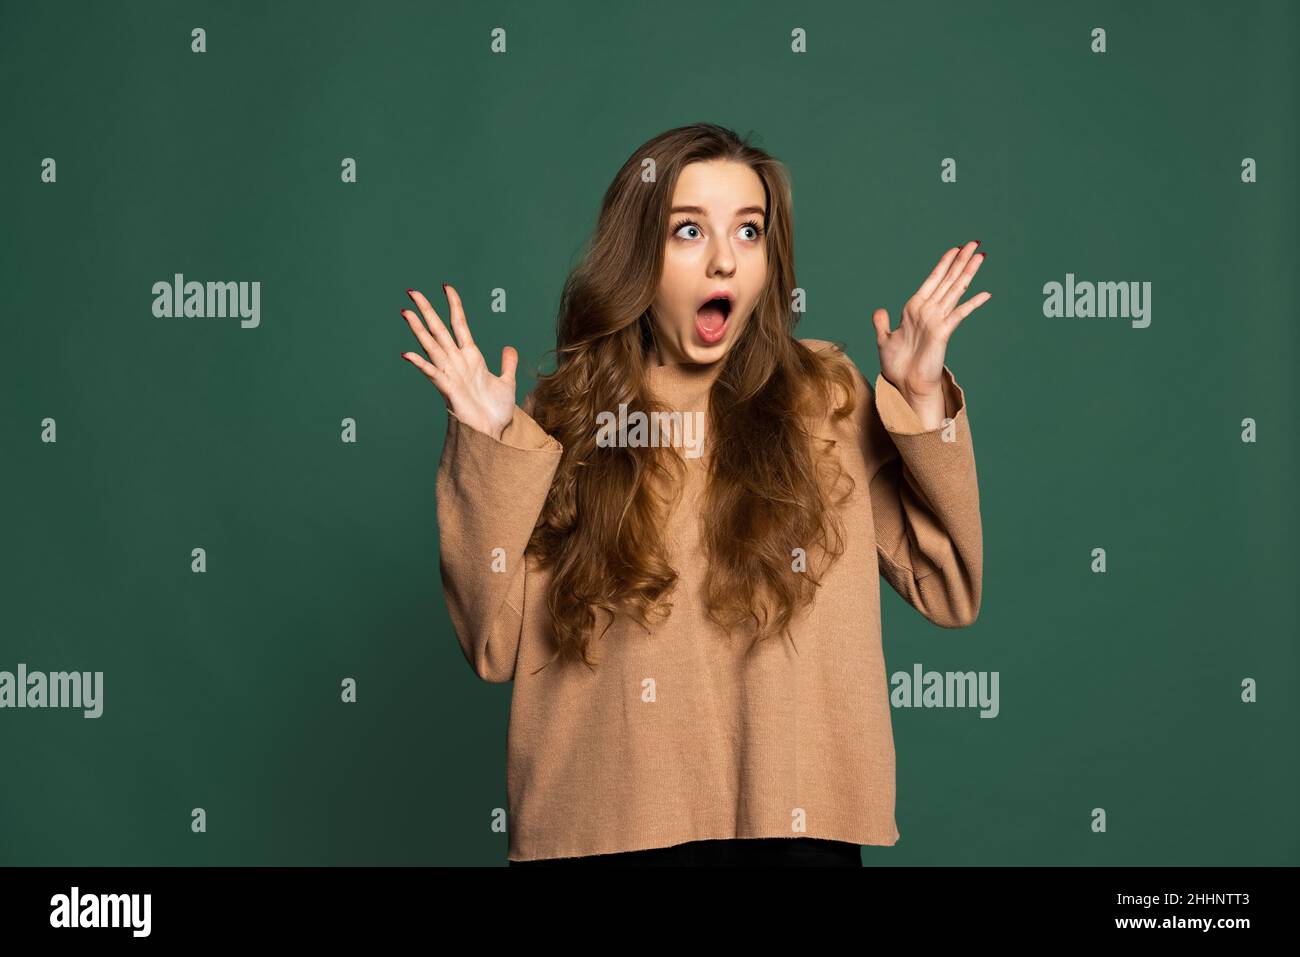 Surprised young beautiful girl wearing brown sweatshirt isolated on green background. Concept of emotions, facial expression Stock Photo